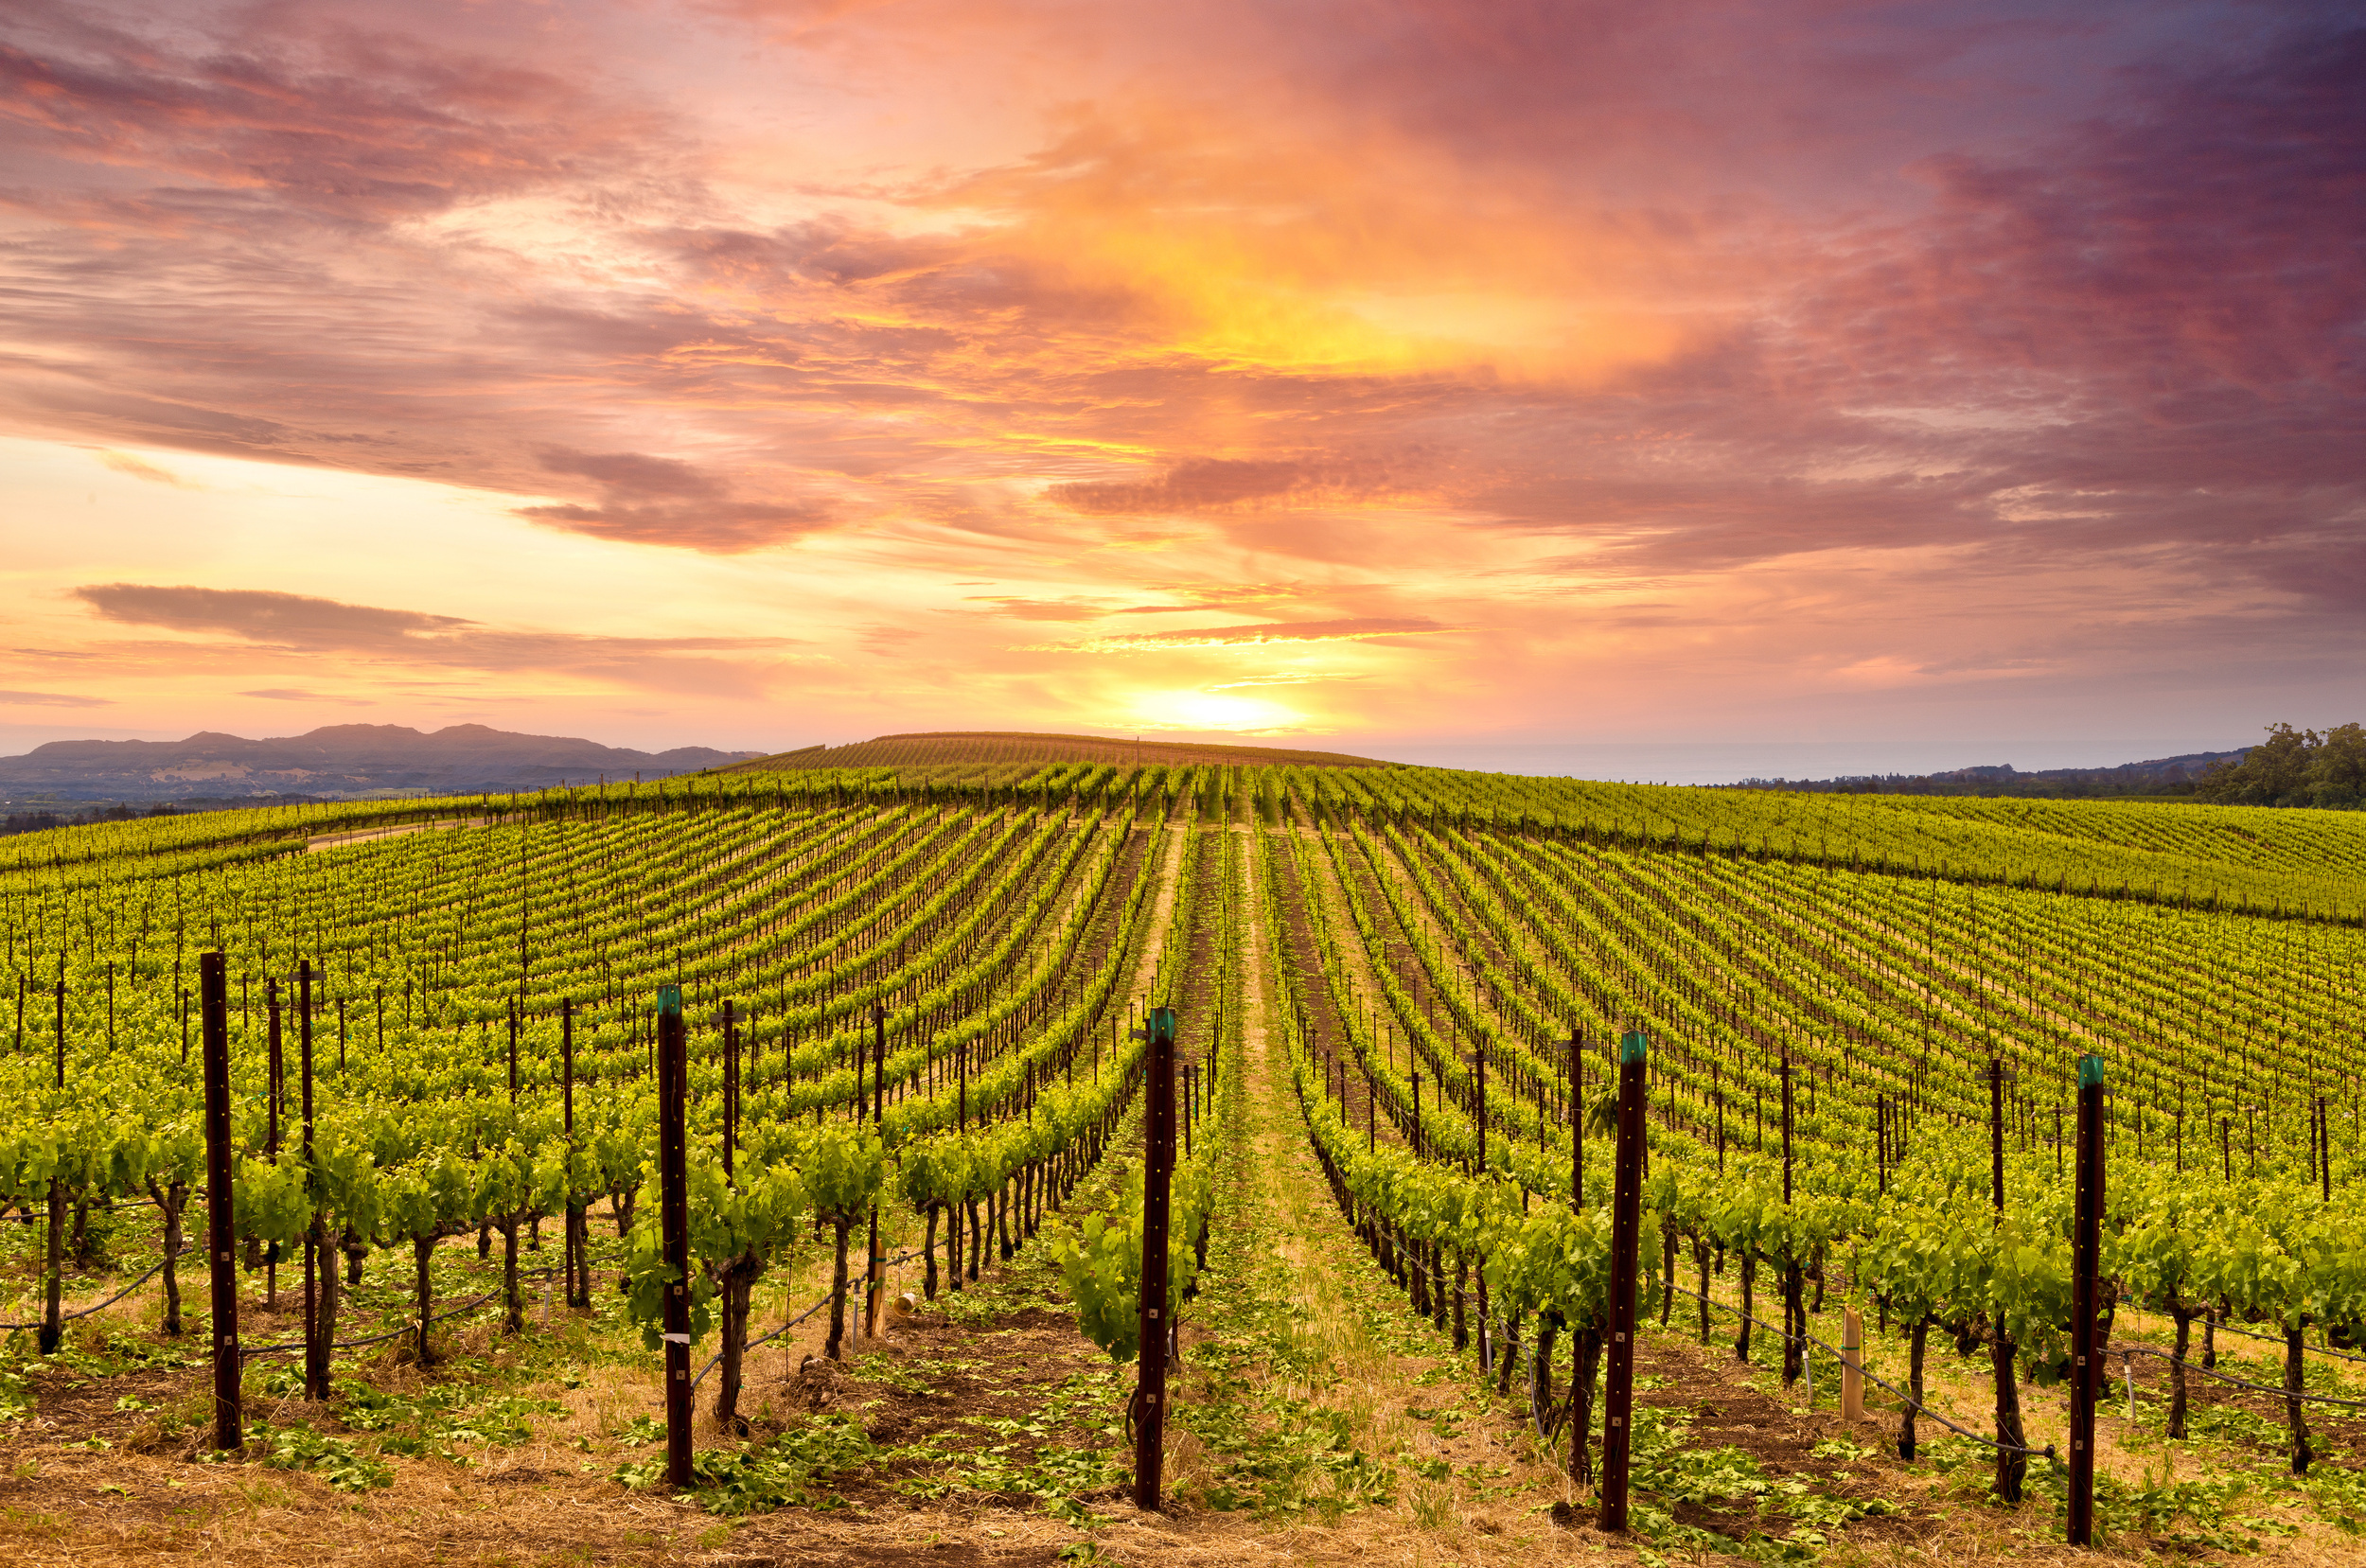 <p>Another option to the itinerary above starting in Eugene is to skip nature and head right into wine country via the Willamette Scenic Highway. An easy day trip, or you can stay a few nights and visit every winery.</p><p>You may also like: <a href='https://www.yardbarker.com/lifestyle/articles/12_high_fat_foods_you_should_avoid_and_12_you_should_eat_regularly_122923/s1__39147466'>12 high-fat foods you should avoid and 12 you should eat regularly</a></p>